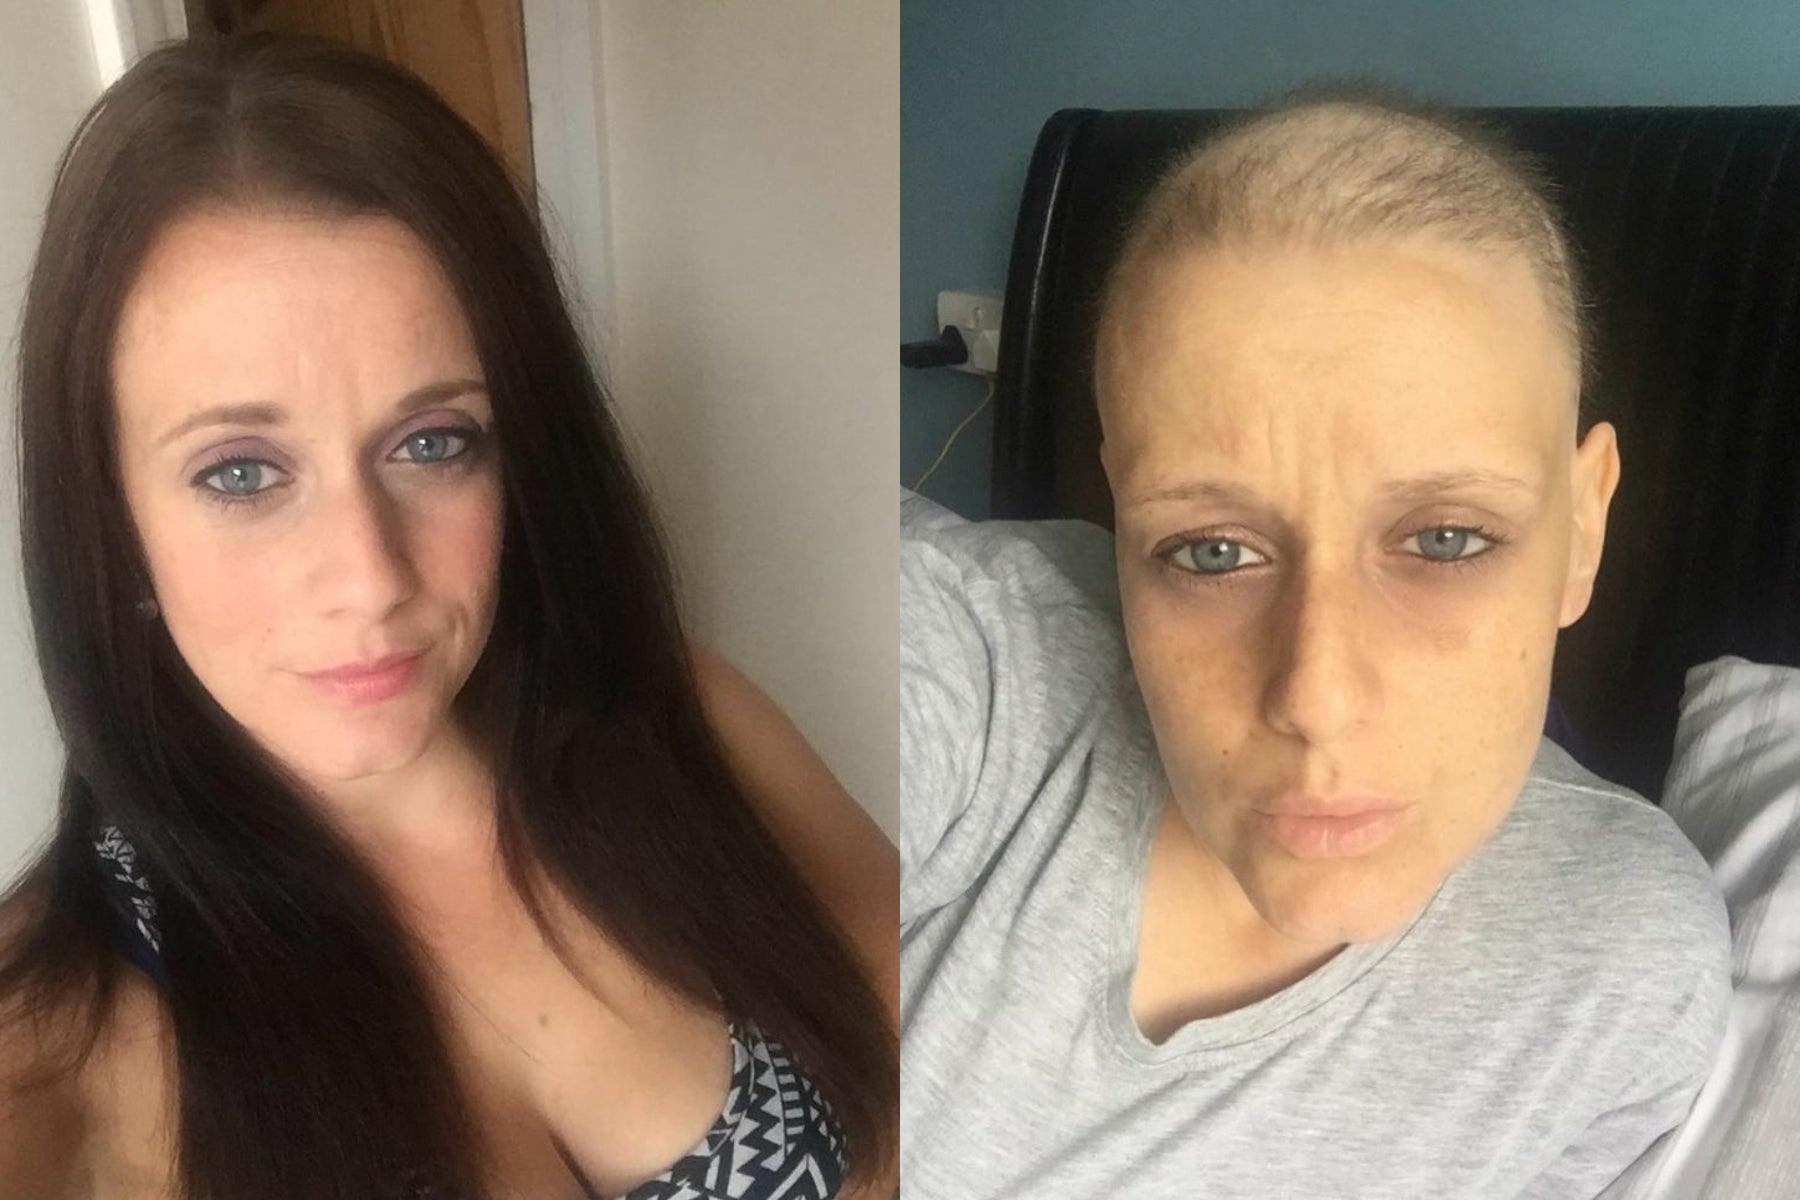 Leanne is now in remission and is encouraging others to appreciate the 'simple things' in life (Collect/PA Real Life)